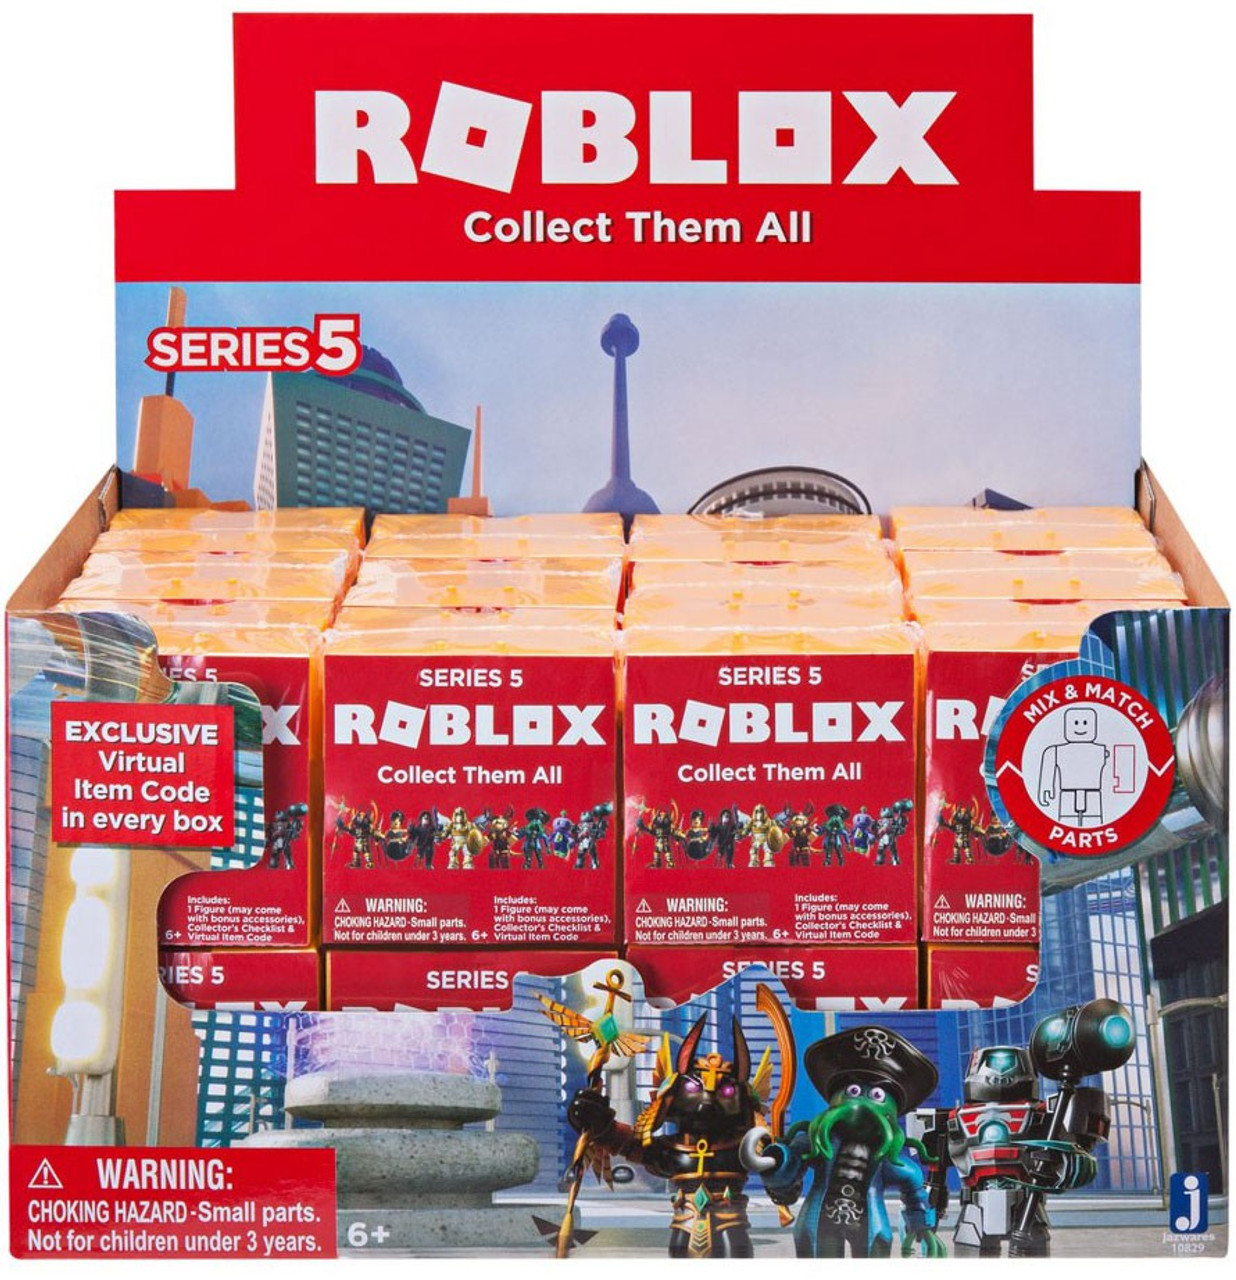 Roblox Series 5 Yellow Gold Blind Box Toys Figures 1 2 3 4 - box on a box roblox